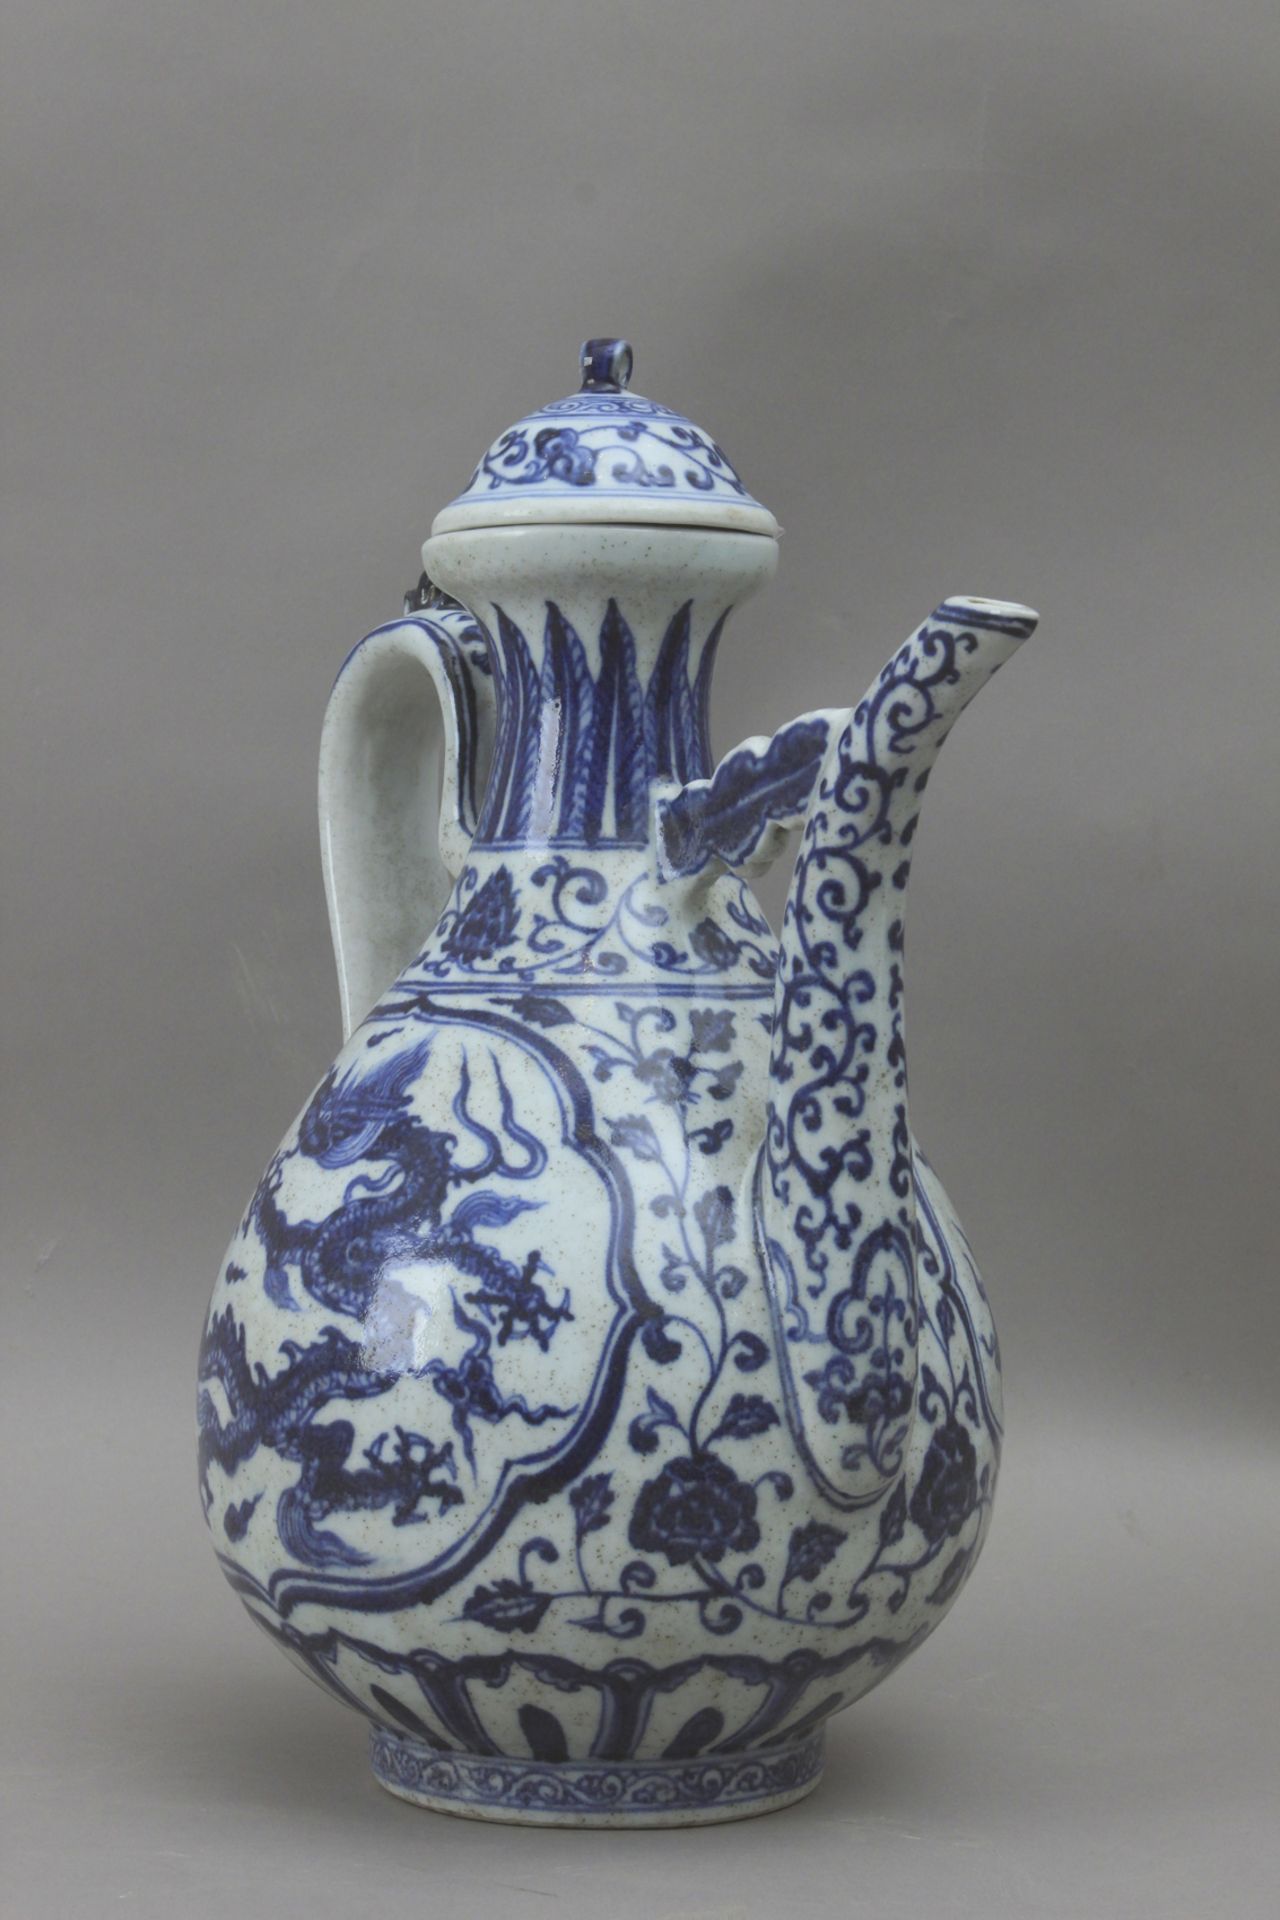 A 19th century Chinese wine pitcher from Qing dynasty